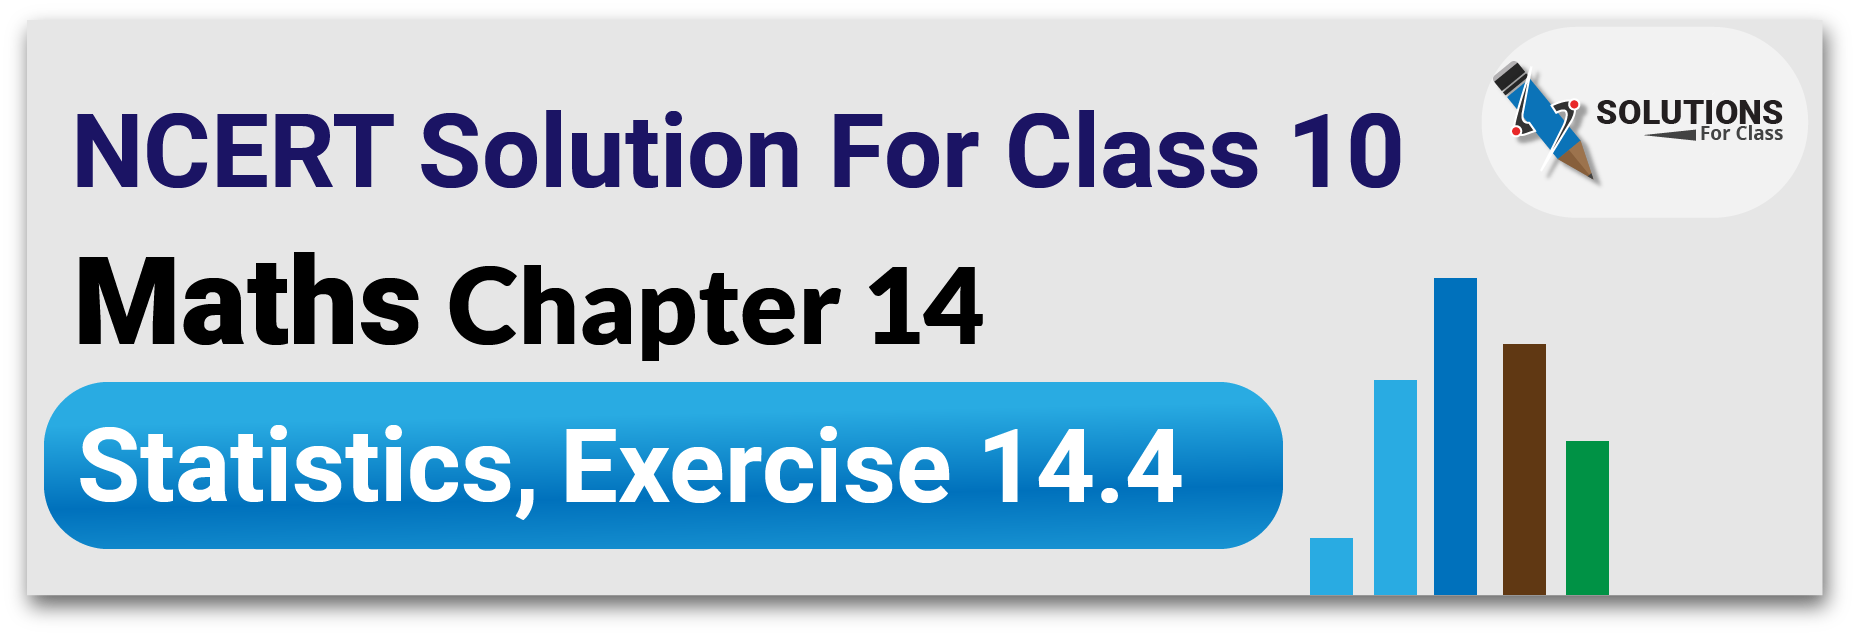 NCERT Solutions For Class 10, Maths, Chapter 14, Statistics, Exercise 14.4